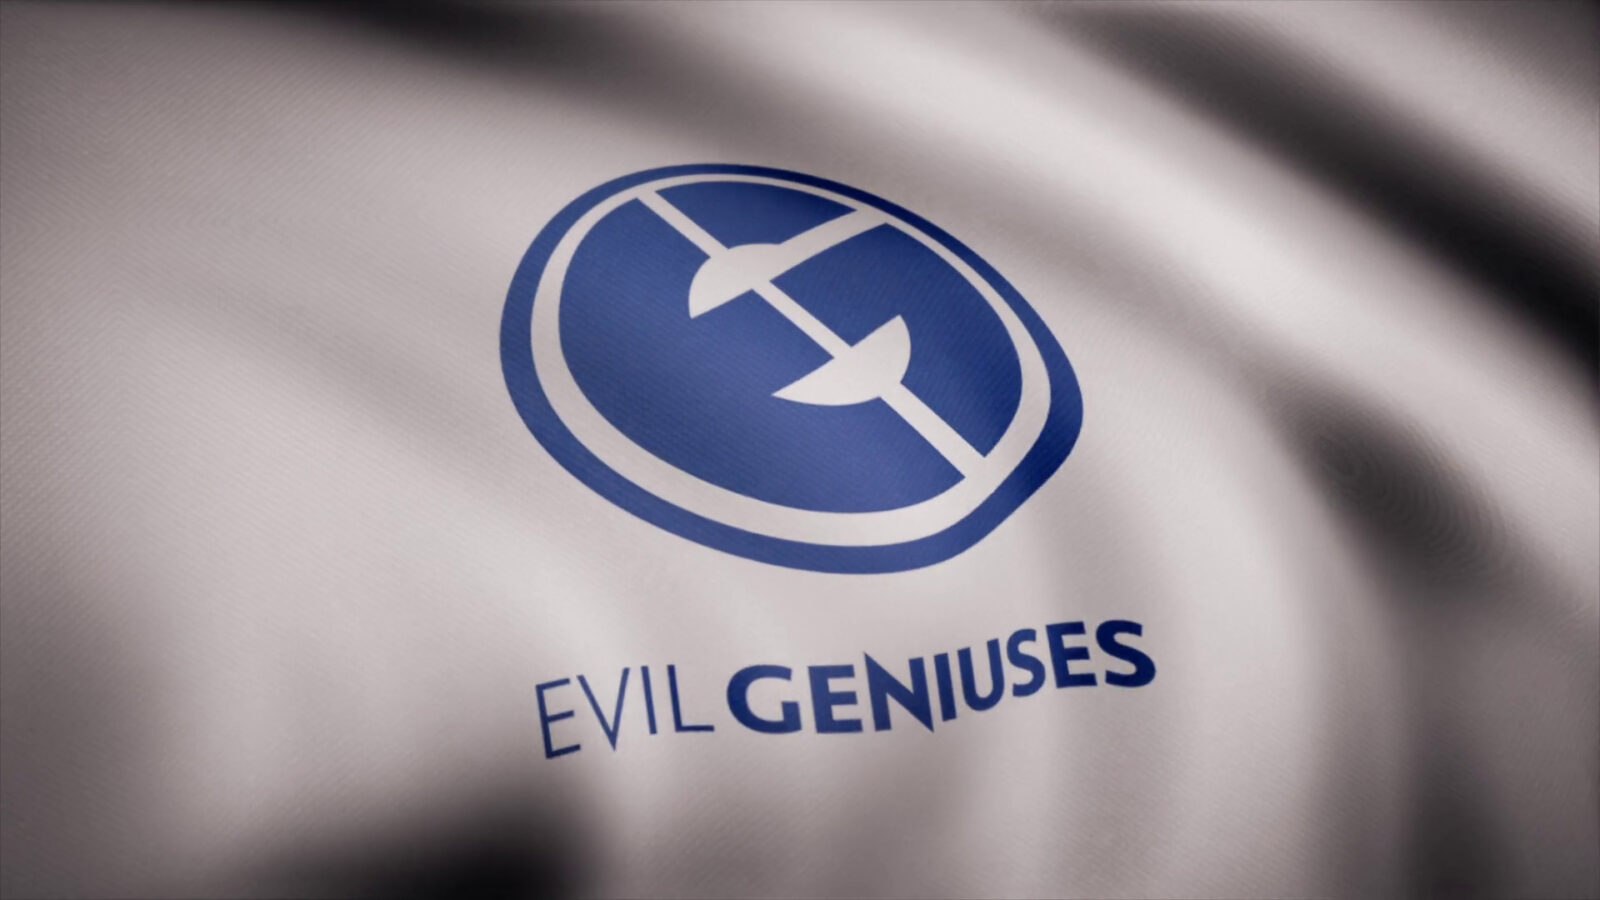 Evil Geniuses in Dota 2: A Look at Past Year Performance and Upcoming Matches in 2023.